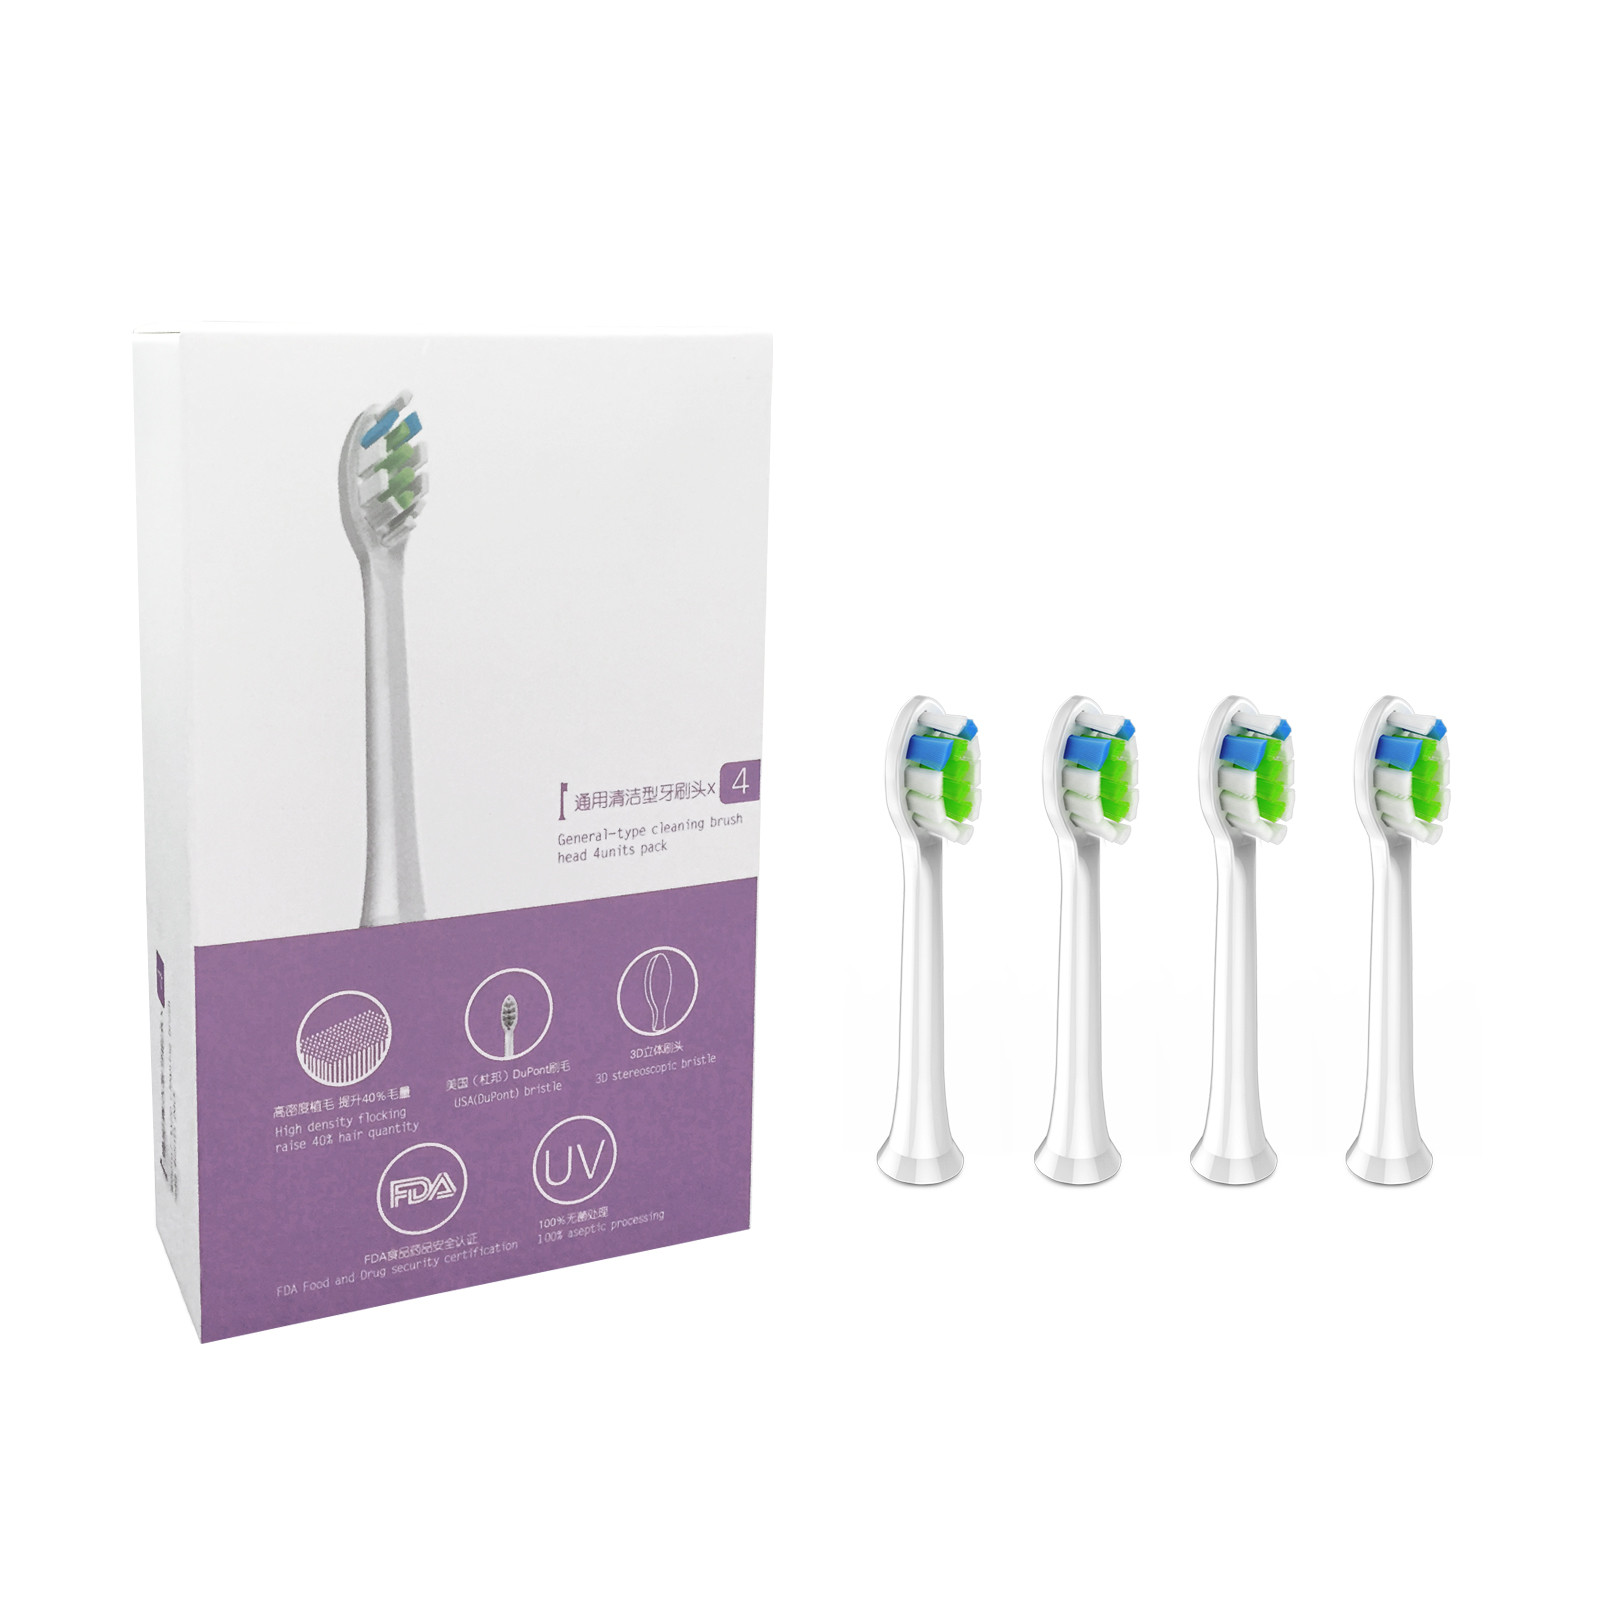 Buy Medium Hanasco Toothbrush Heads , DuPont Oral Care Sonic Toothbrush Heads at wholesale prices